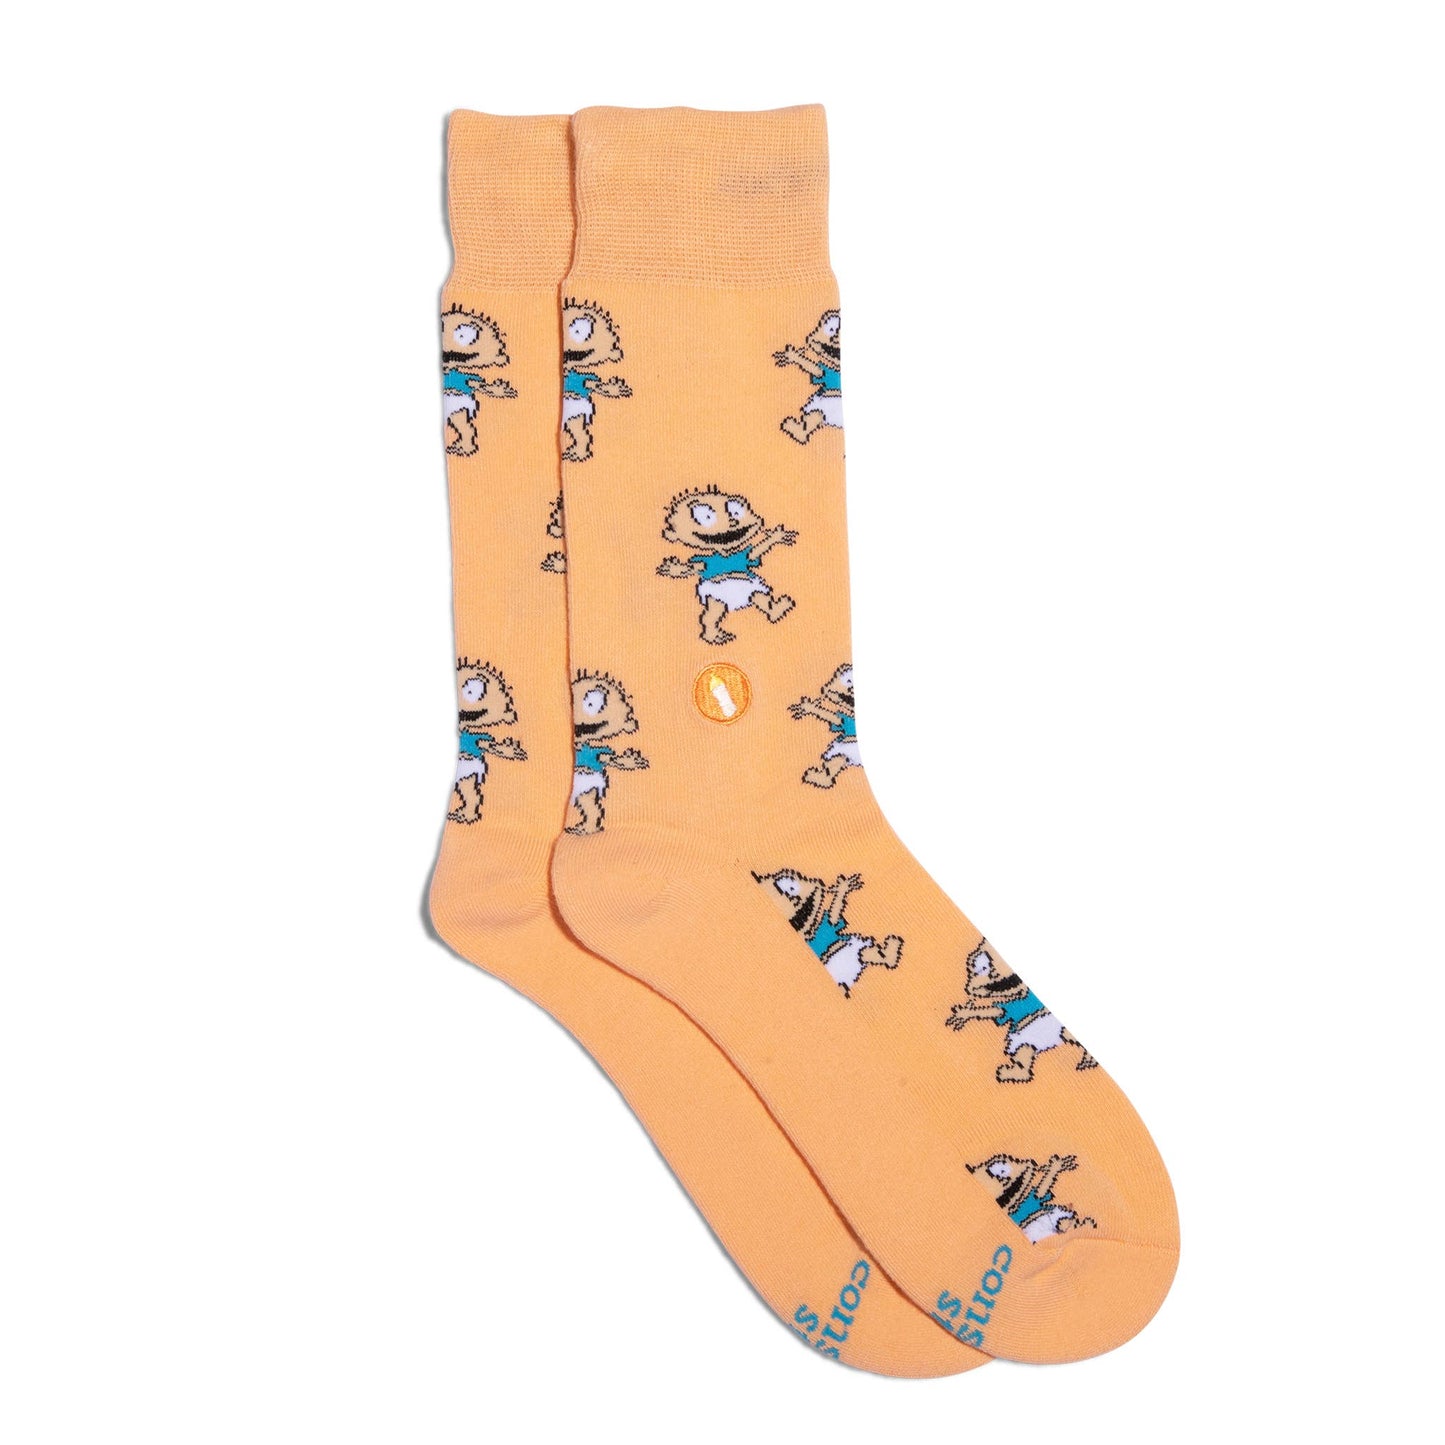 Conscious Step - Rugrats Socks that Find a Cure (Orange Tommy Pickles)  Conscious Step Small  -better made easy-eco-friendly-sustainable-gifting